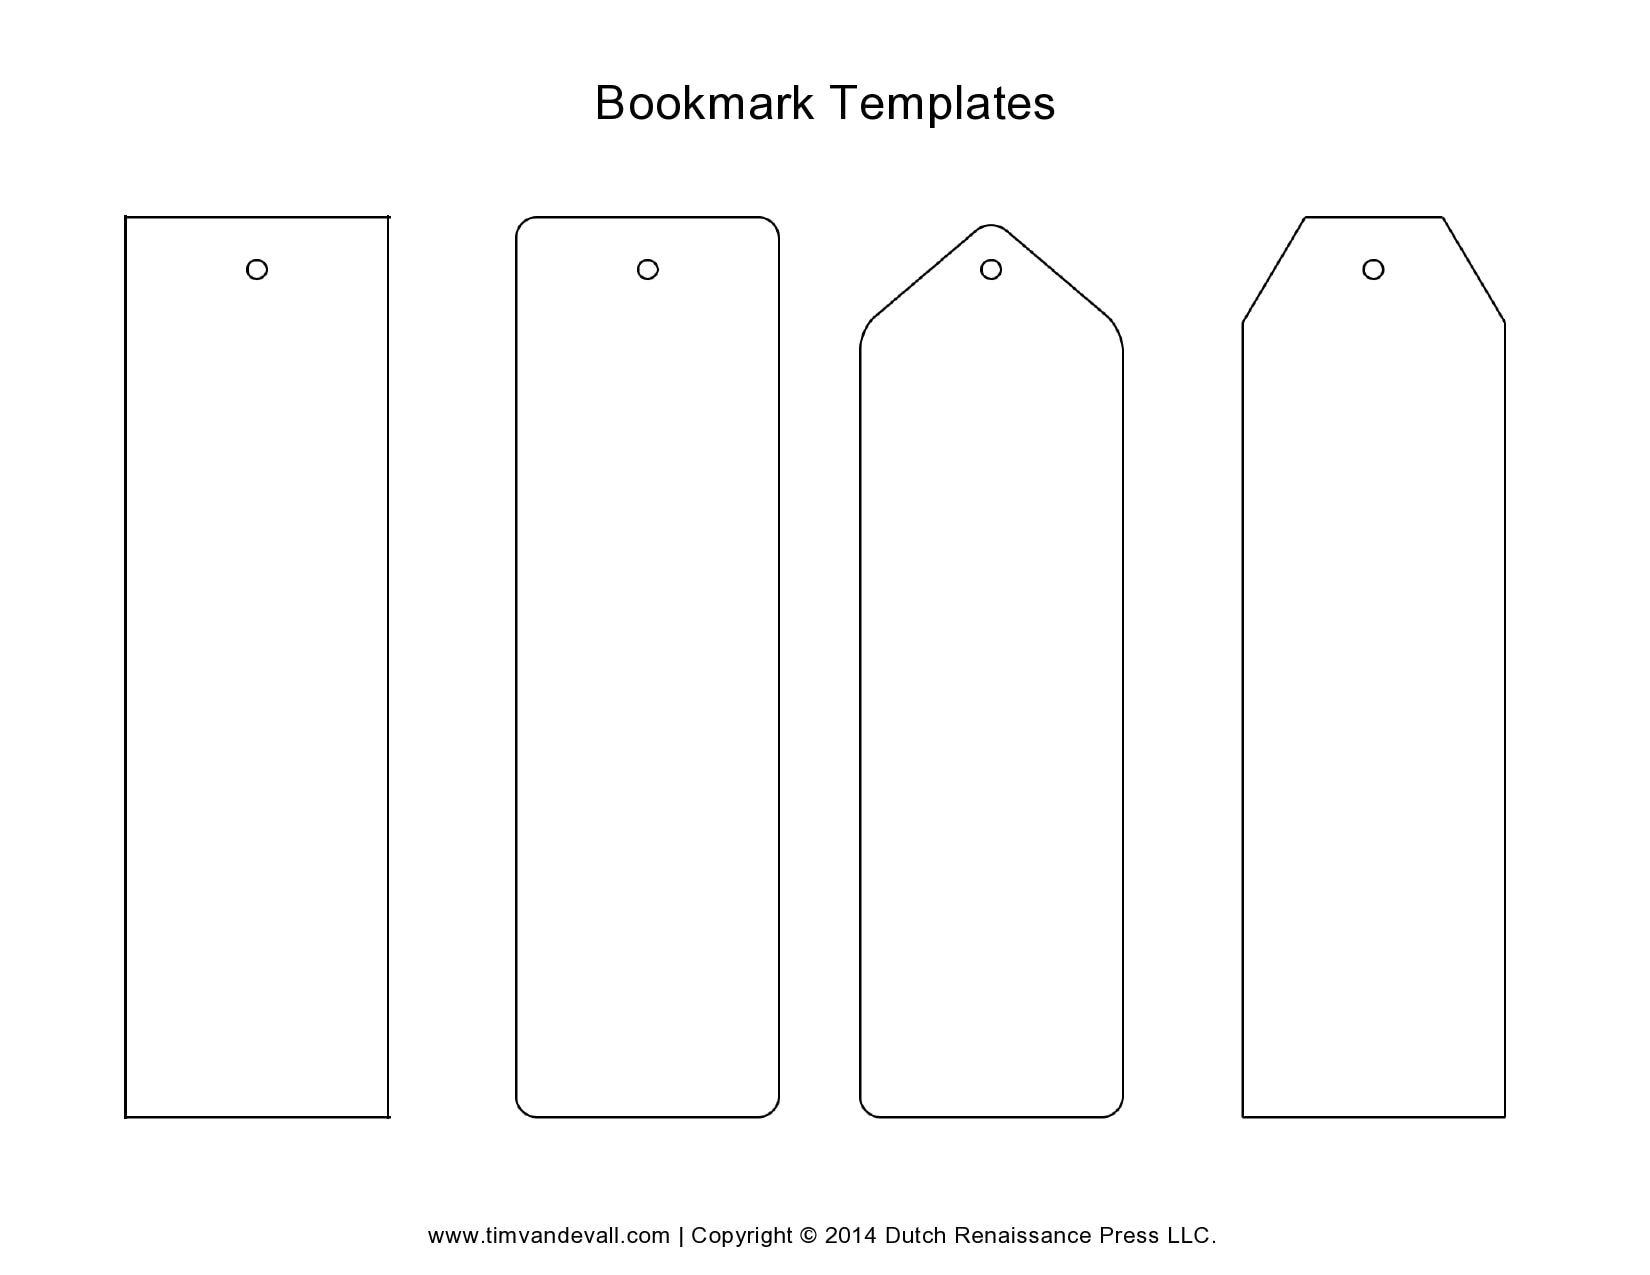 30 Free Bookmark Templates (Word, PDF) - TemplateArchive